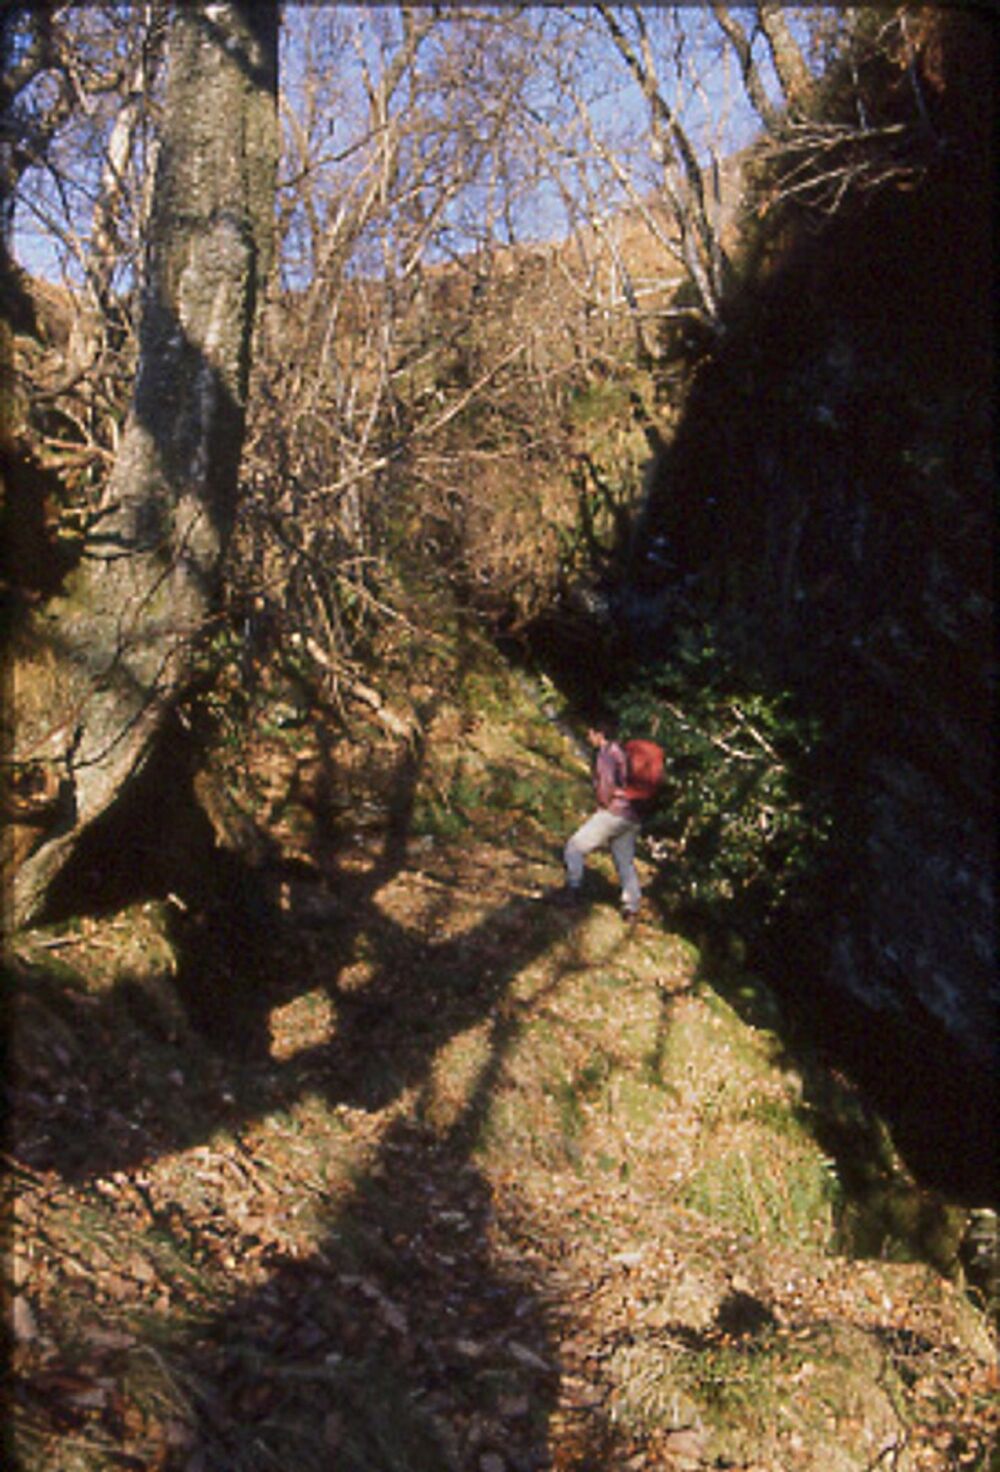 A man stands in a rocky gorge, with large trees growing out of the sides.